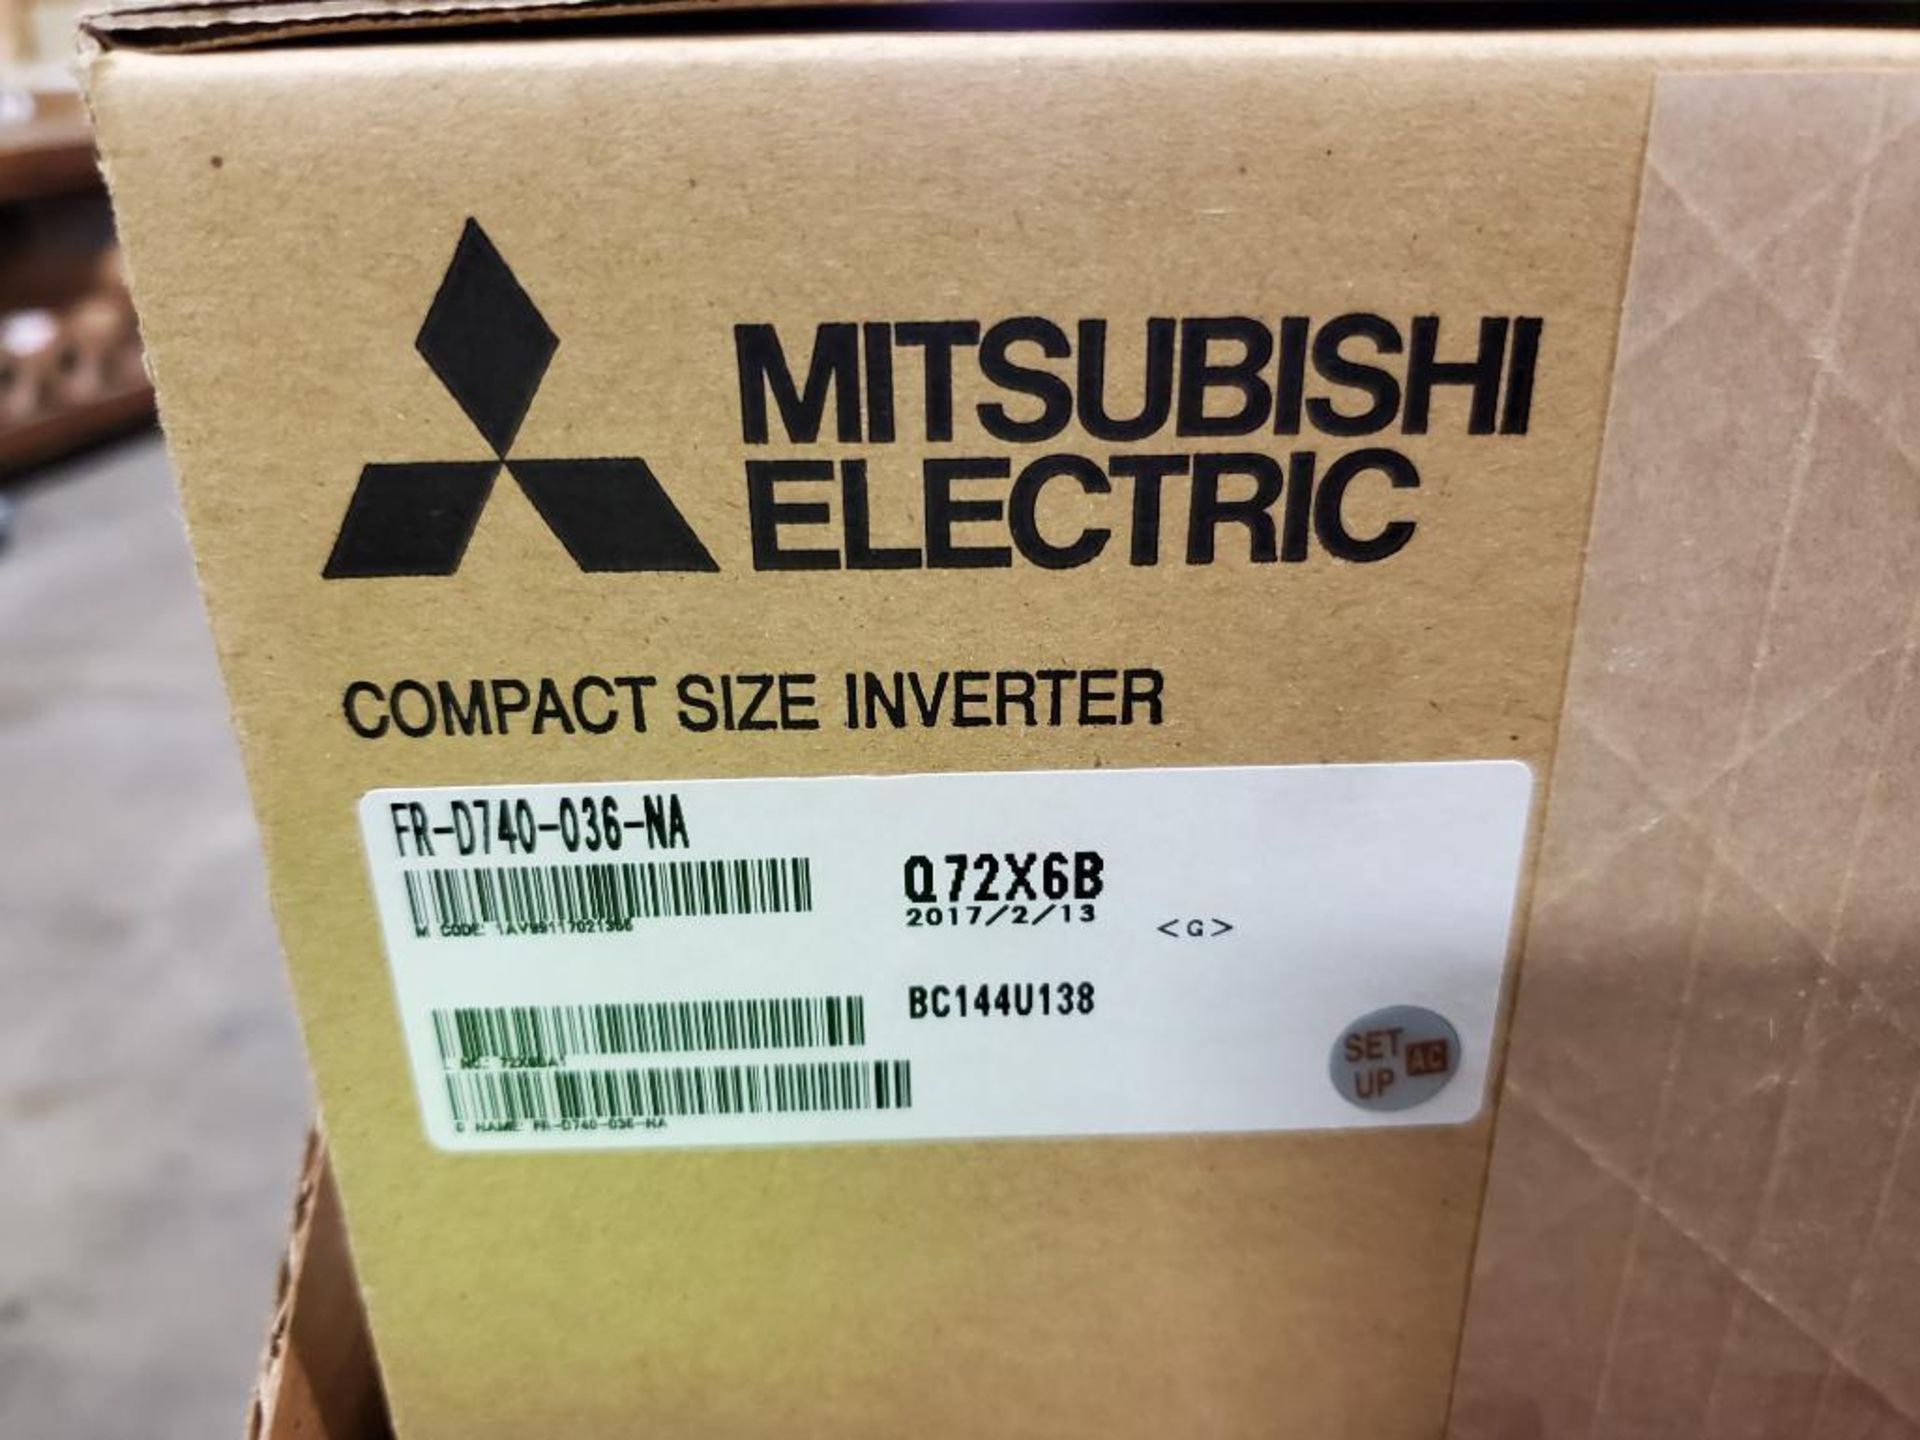 Mitsubishi Electric FR-D740-036-NA compact size inverter. New in box. - Image 2 of 3